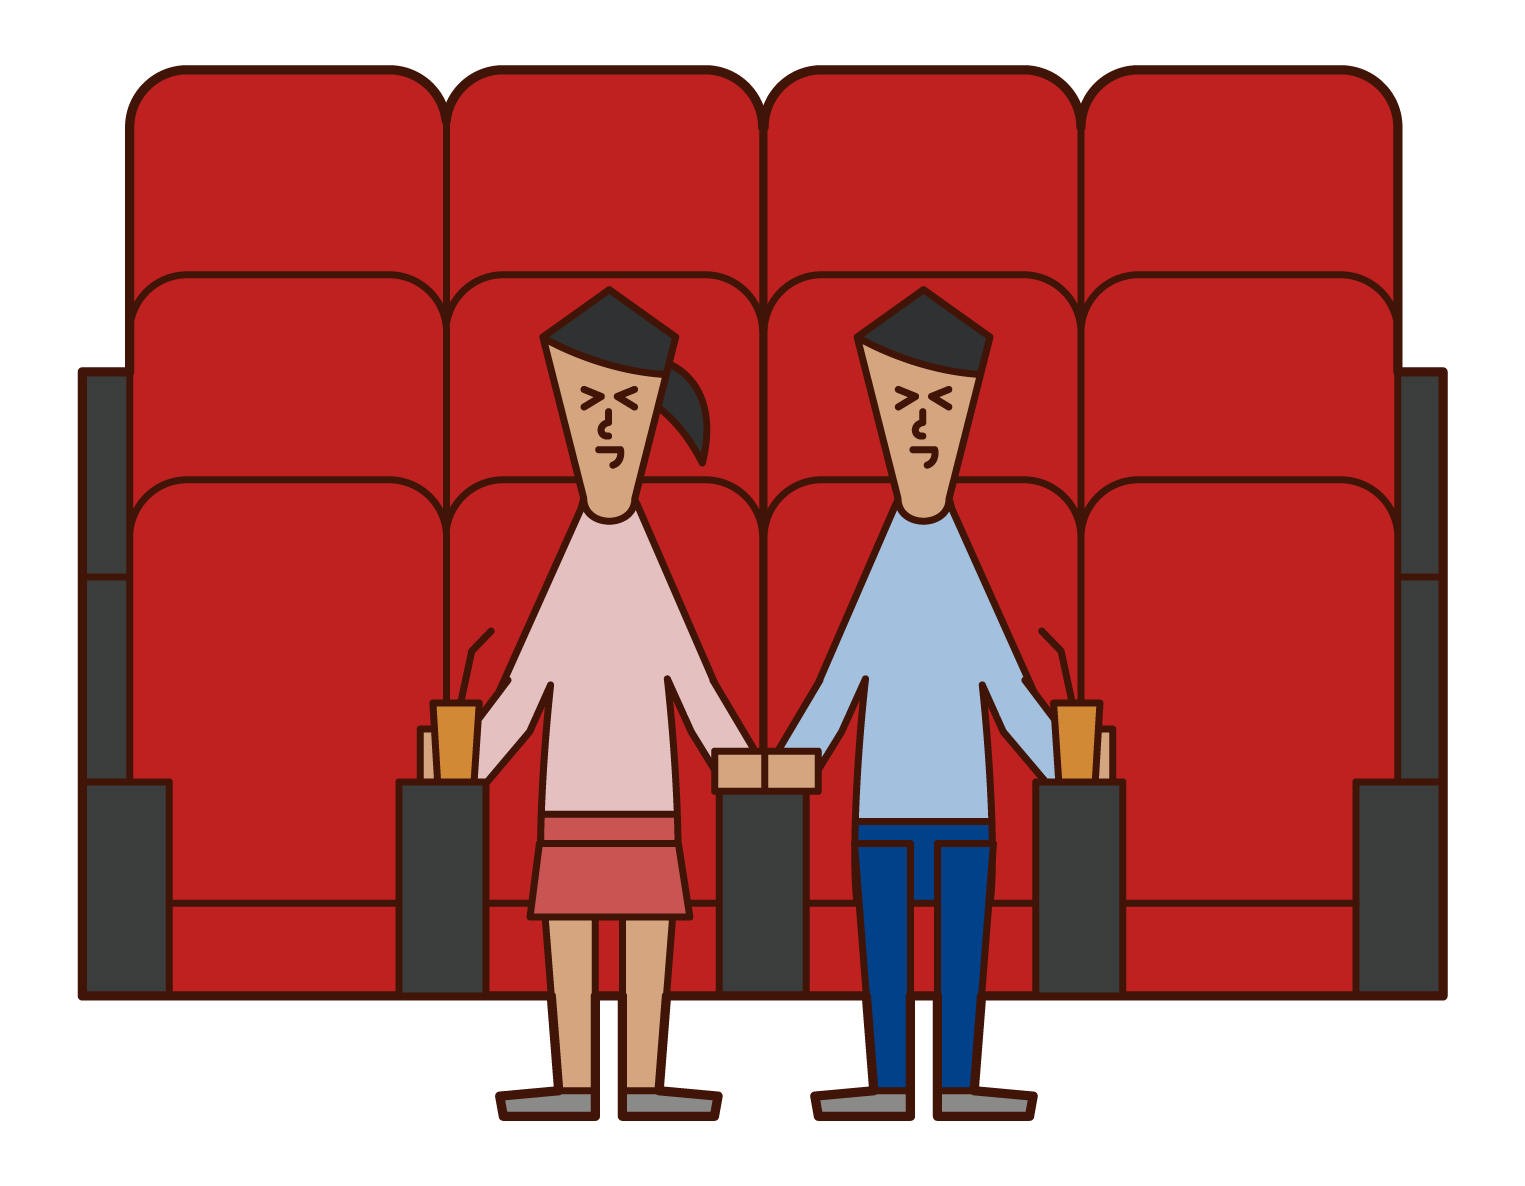 Illustrations of people laughing while watching movies in movie theaters